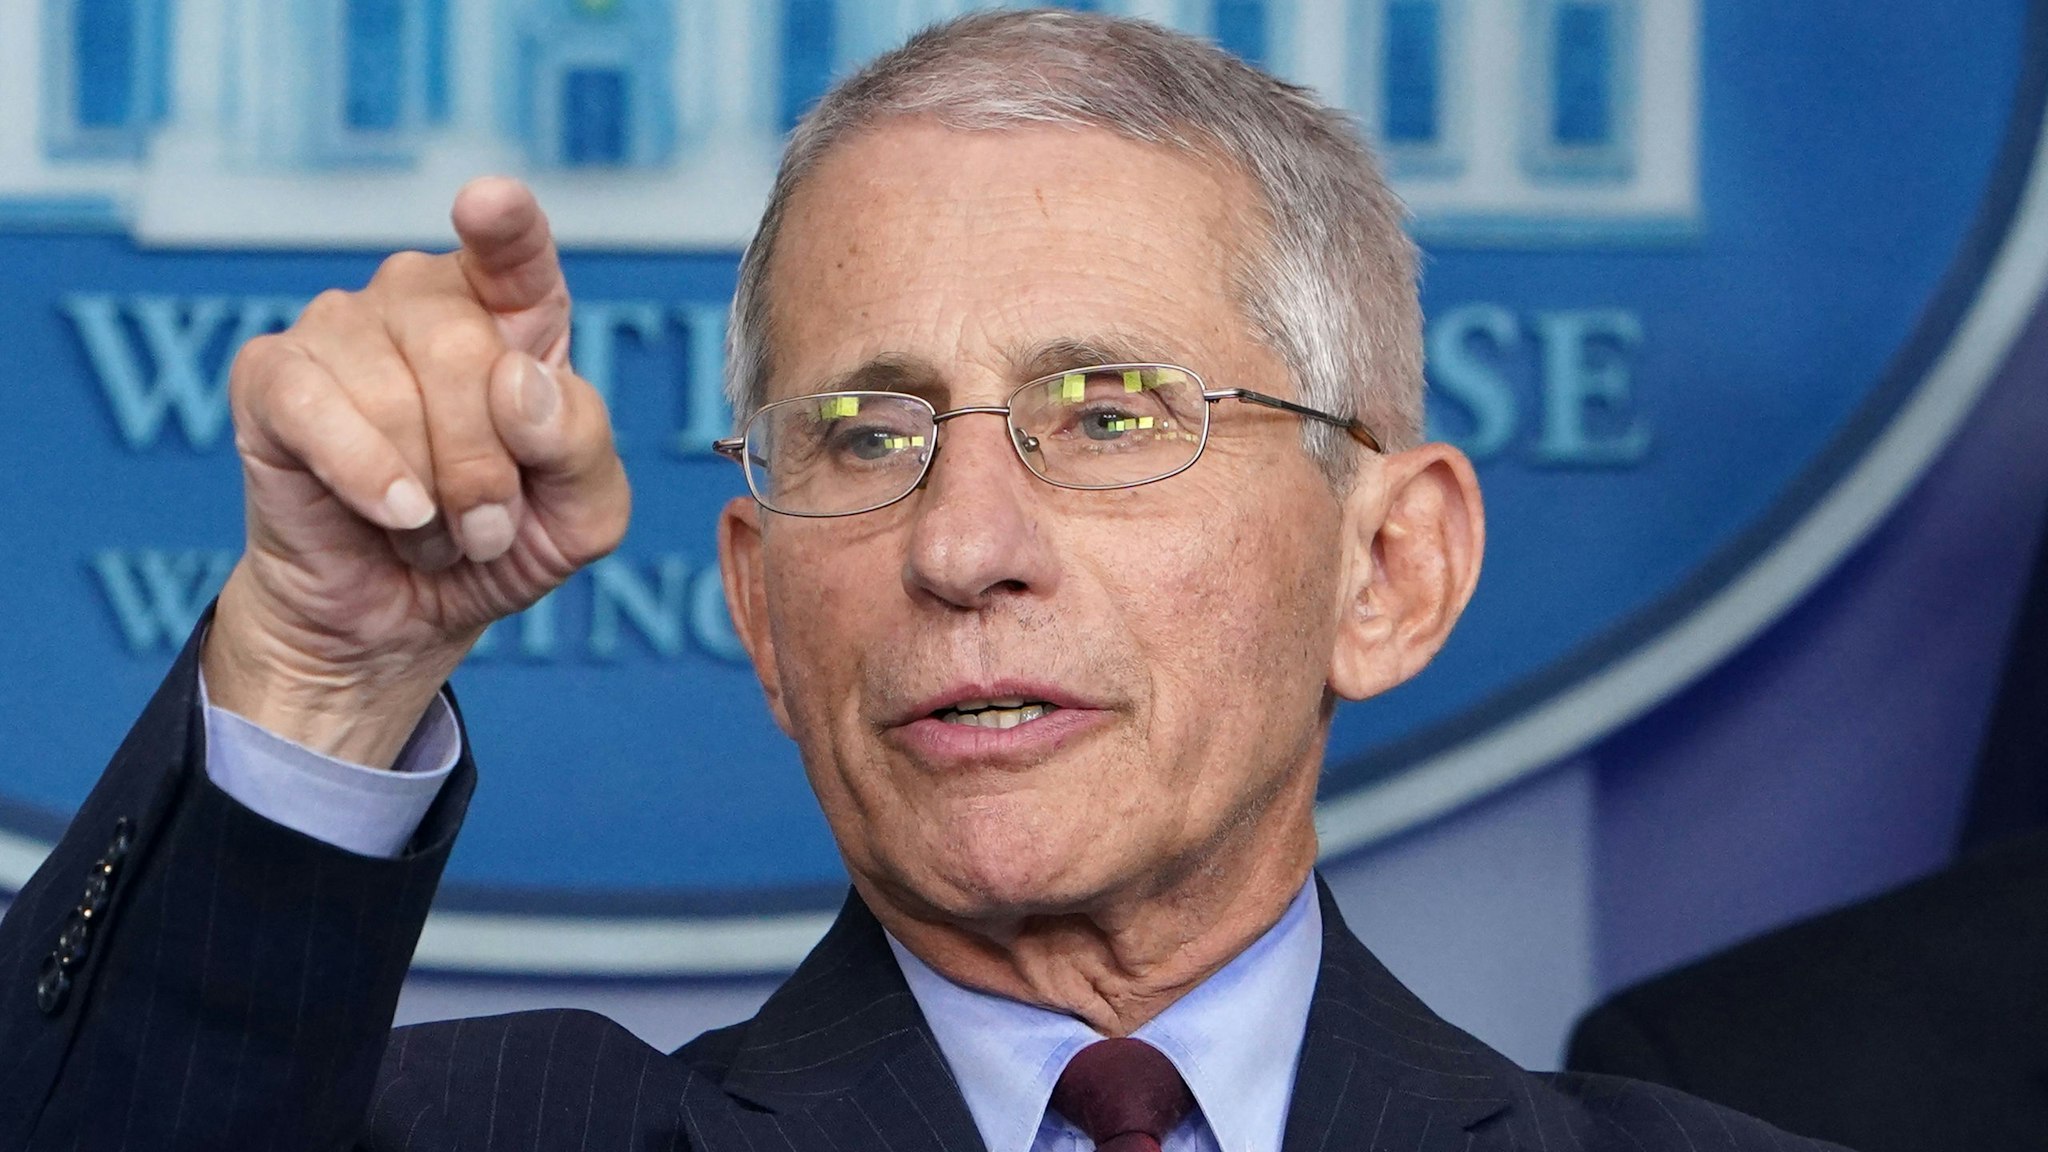 Director of the National Institute of Allergy and Infectious Diseases Anthony Fauci speaks, flanked by US Vice President Mike Pence, during the daily briefing on the novel coronavirus, COVID-19, in the Brady Briefing Room at the White House on March 31, 2020, in Washington, DC.